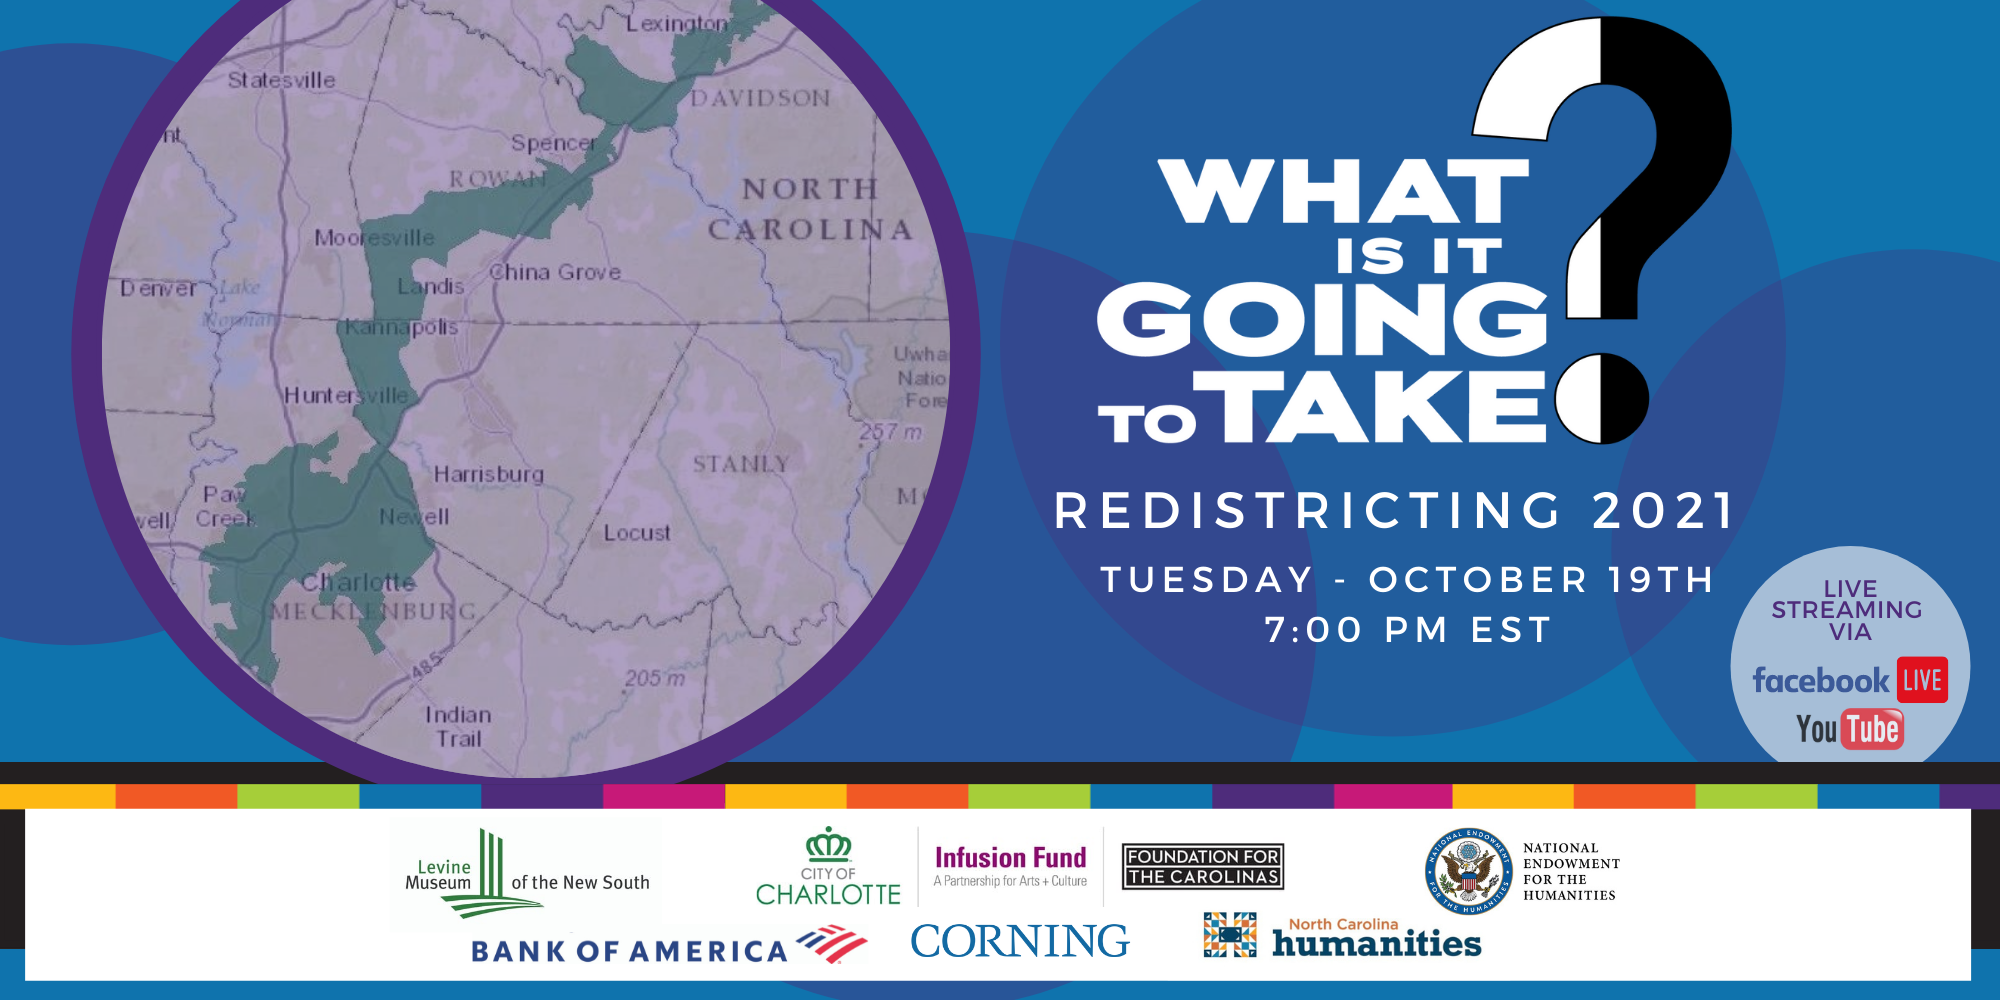 Levine Museum of the New South What Is It Going To Take? Redistricting 2021 Event Image